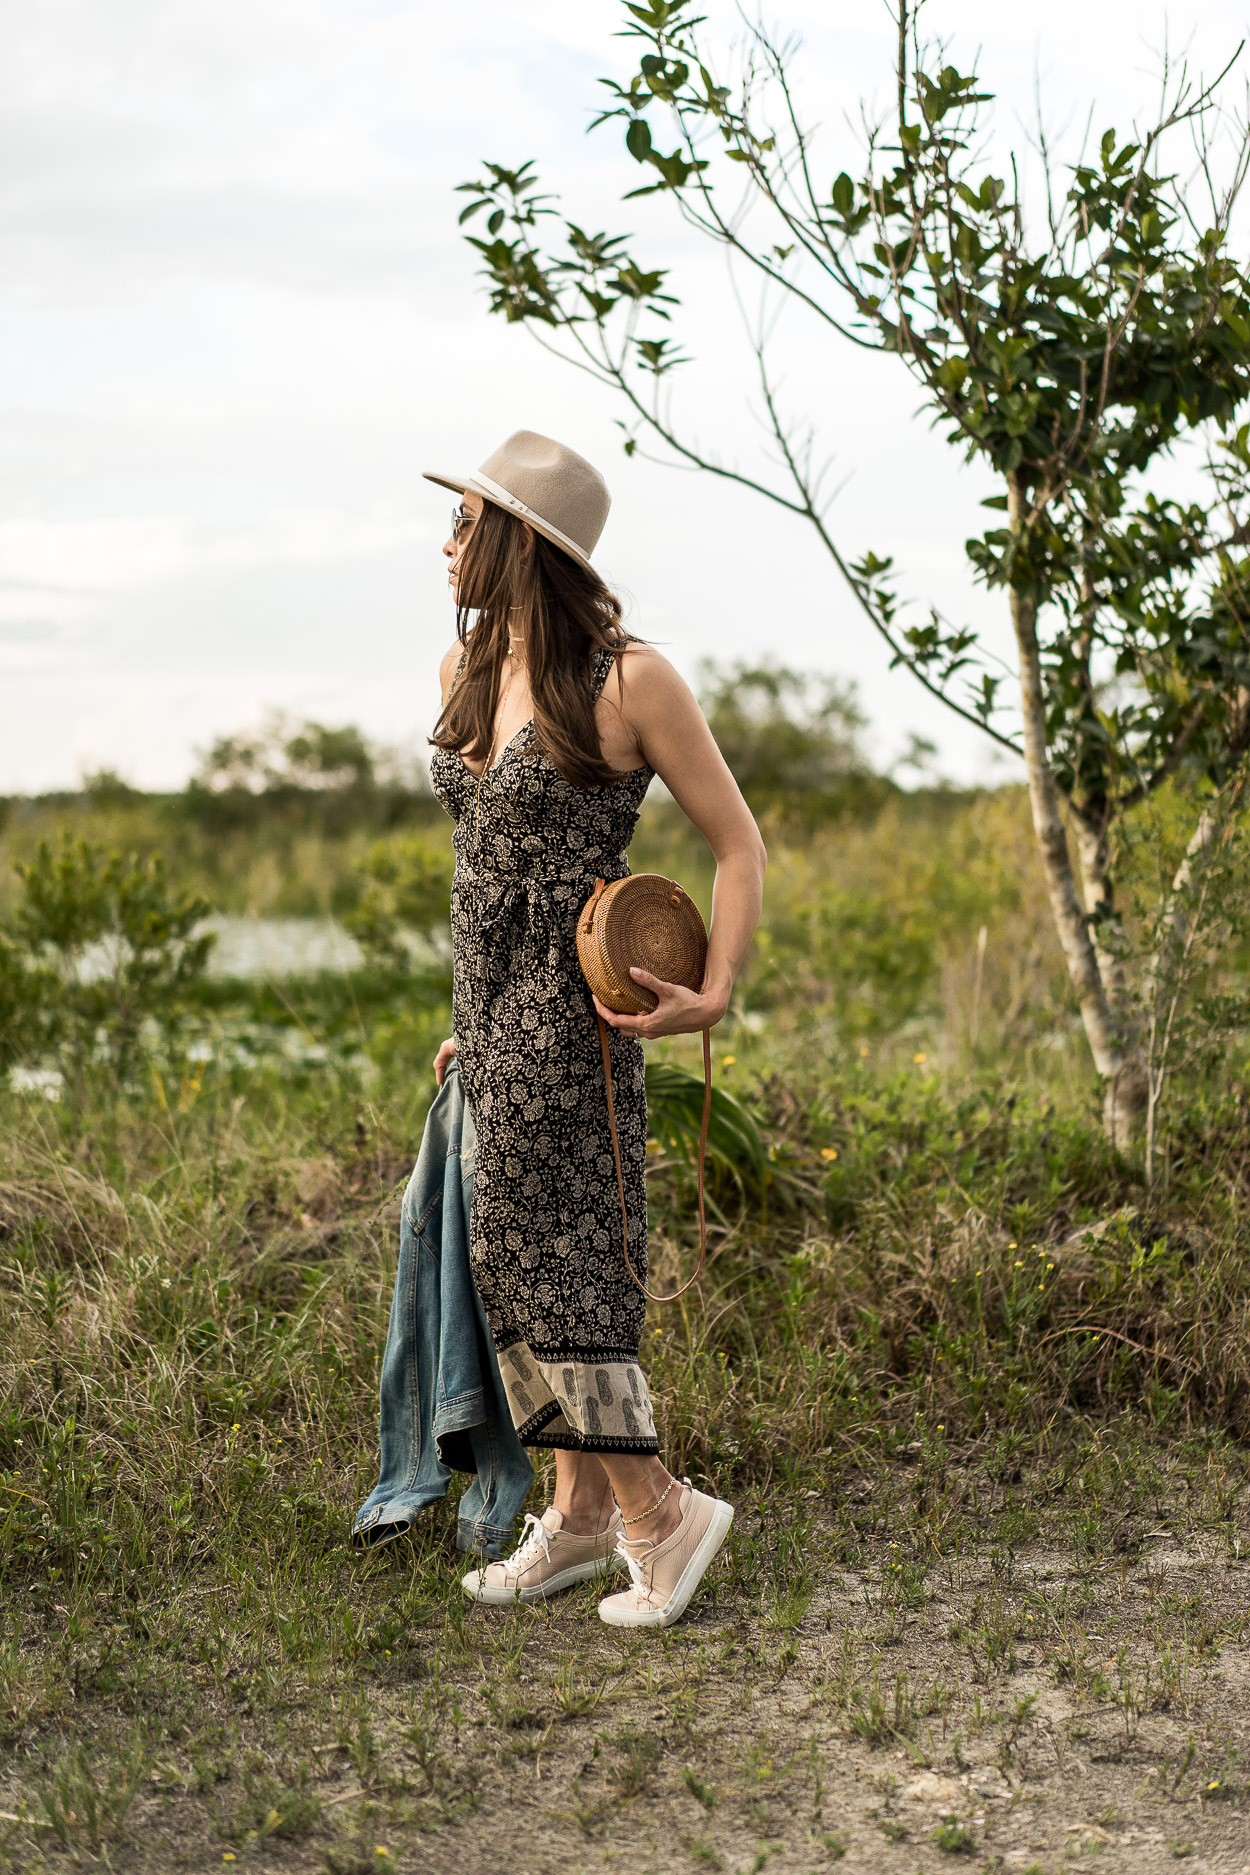 Boho style is so trendy for Summer like this Amuse Society jumpsuit Amanda of A Glam Lifestyle blog wears with chic accessories like round basket bag and MGemi Palestra sneakers